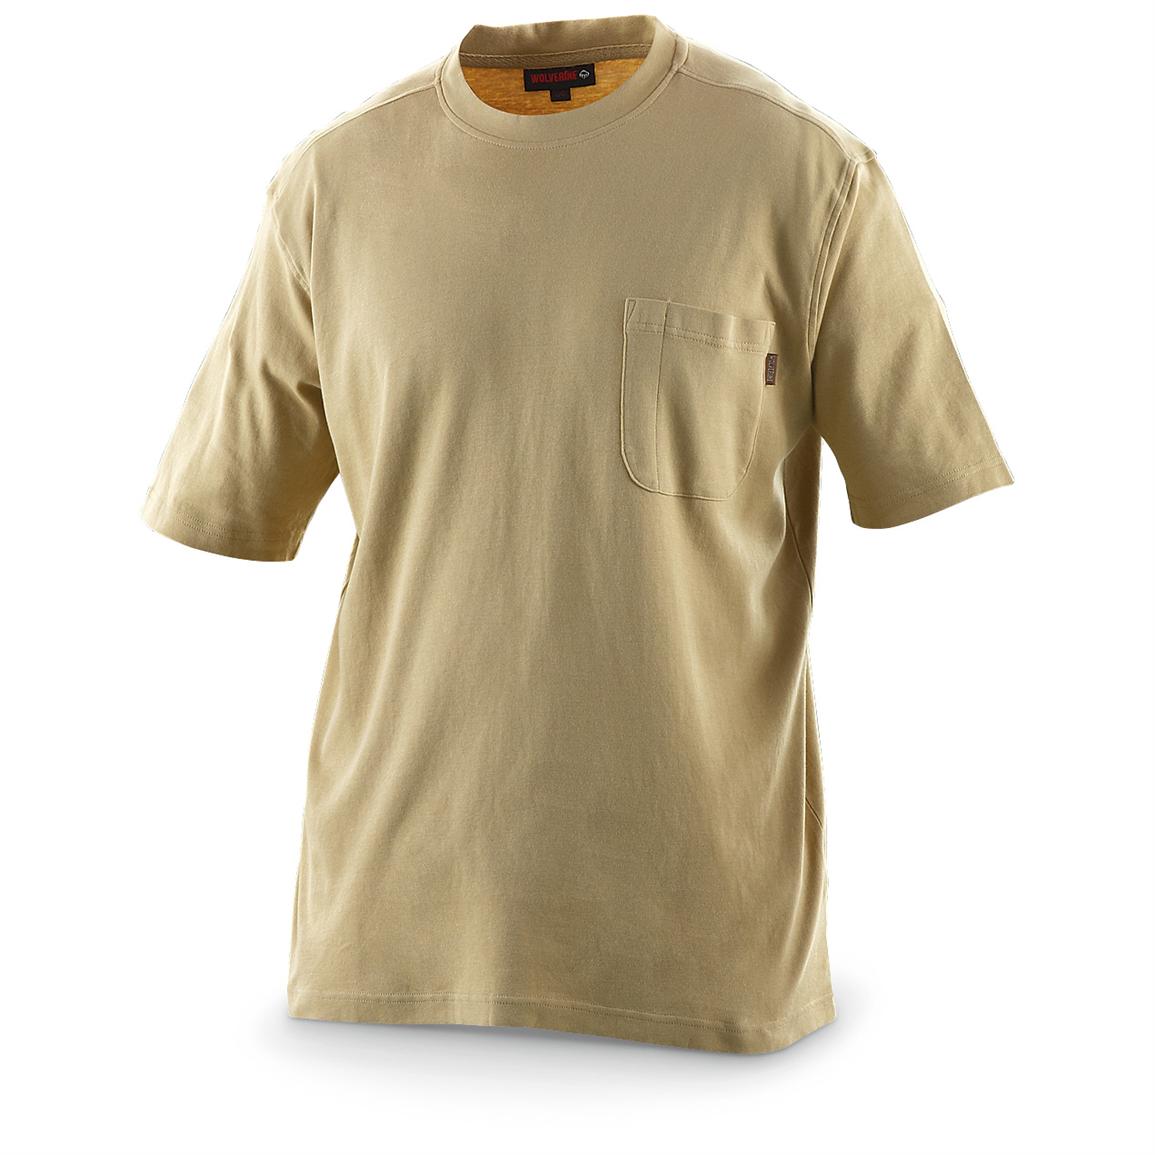 Wolverine® Pocket T - shirt - 222137, T-Shirts at Sportsman's Guide